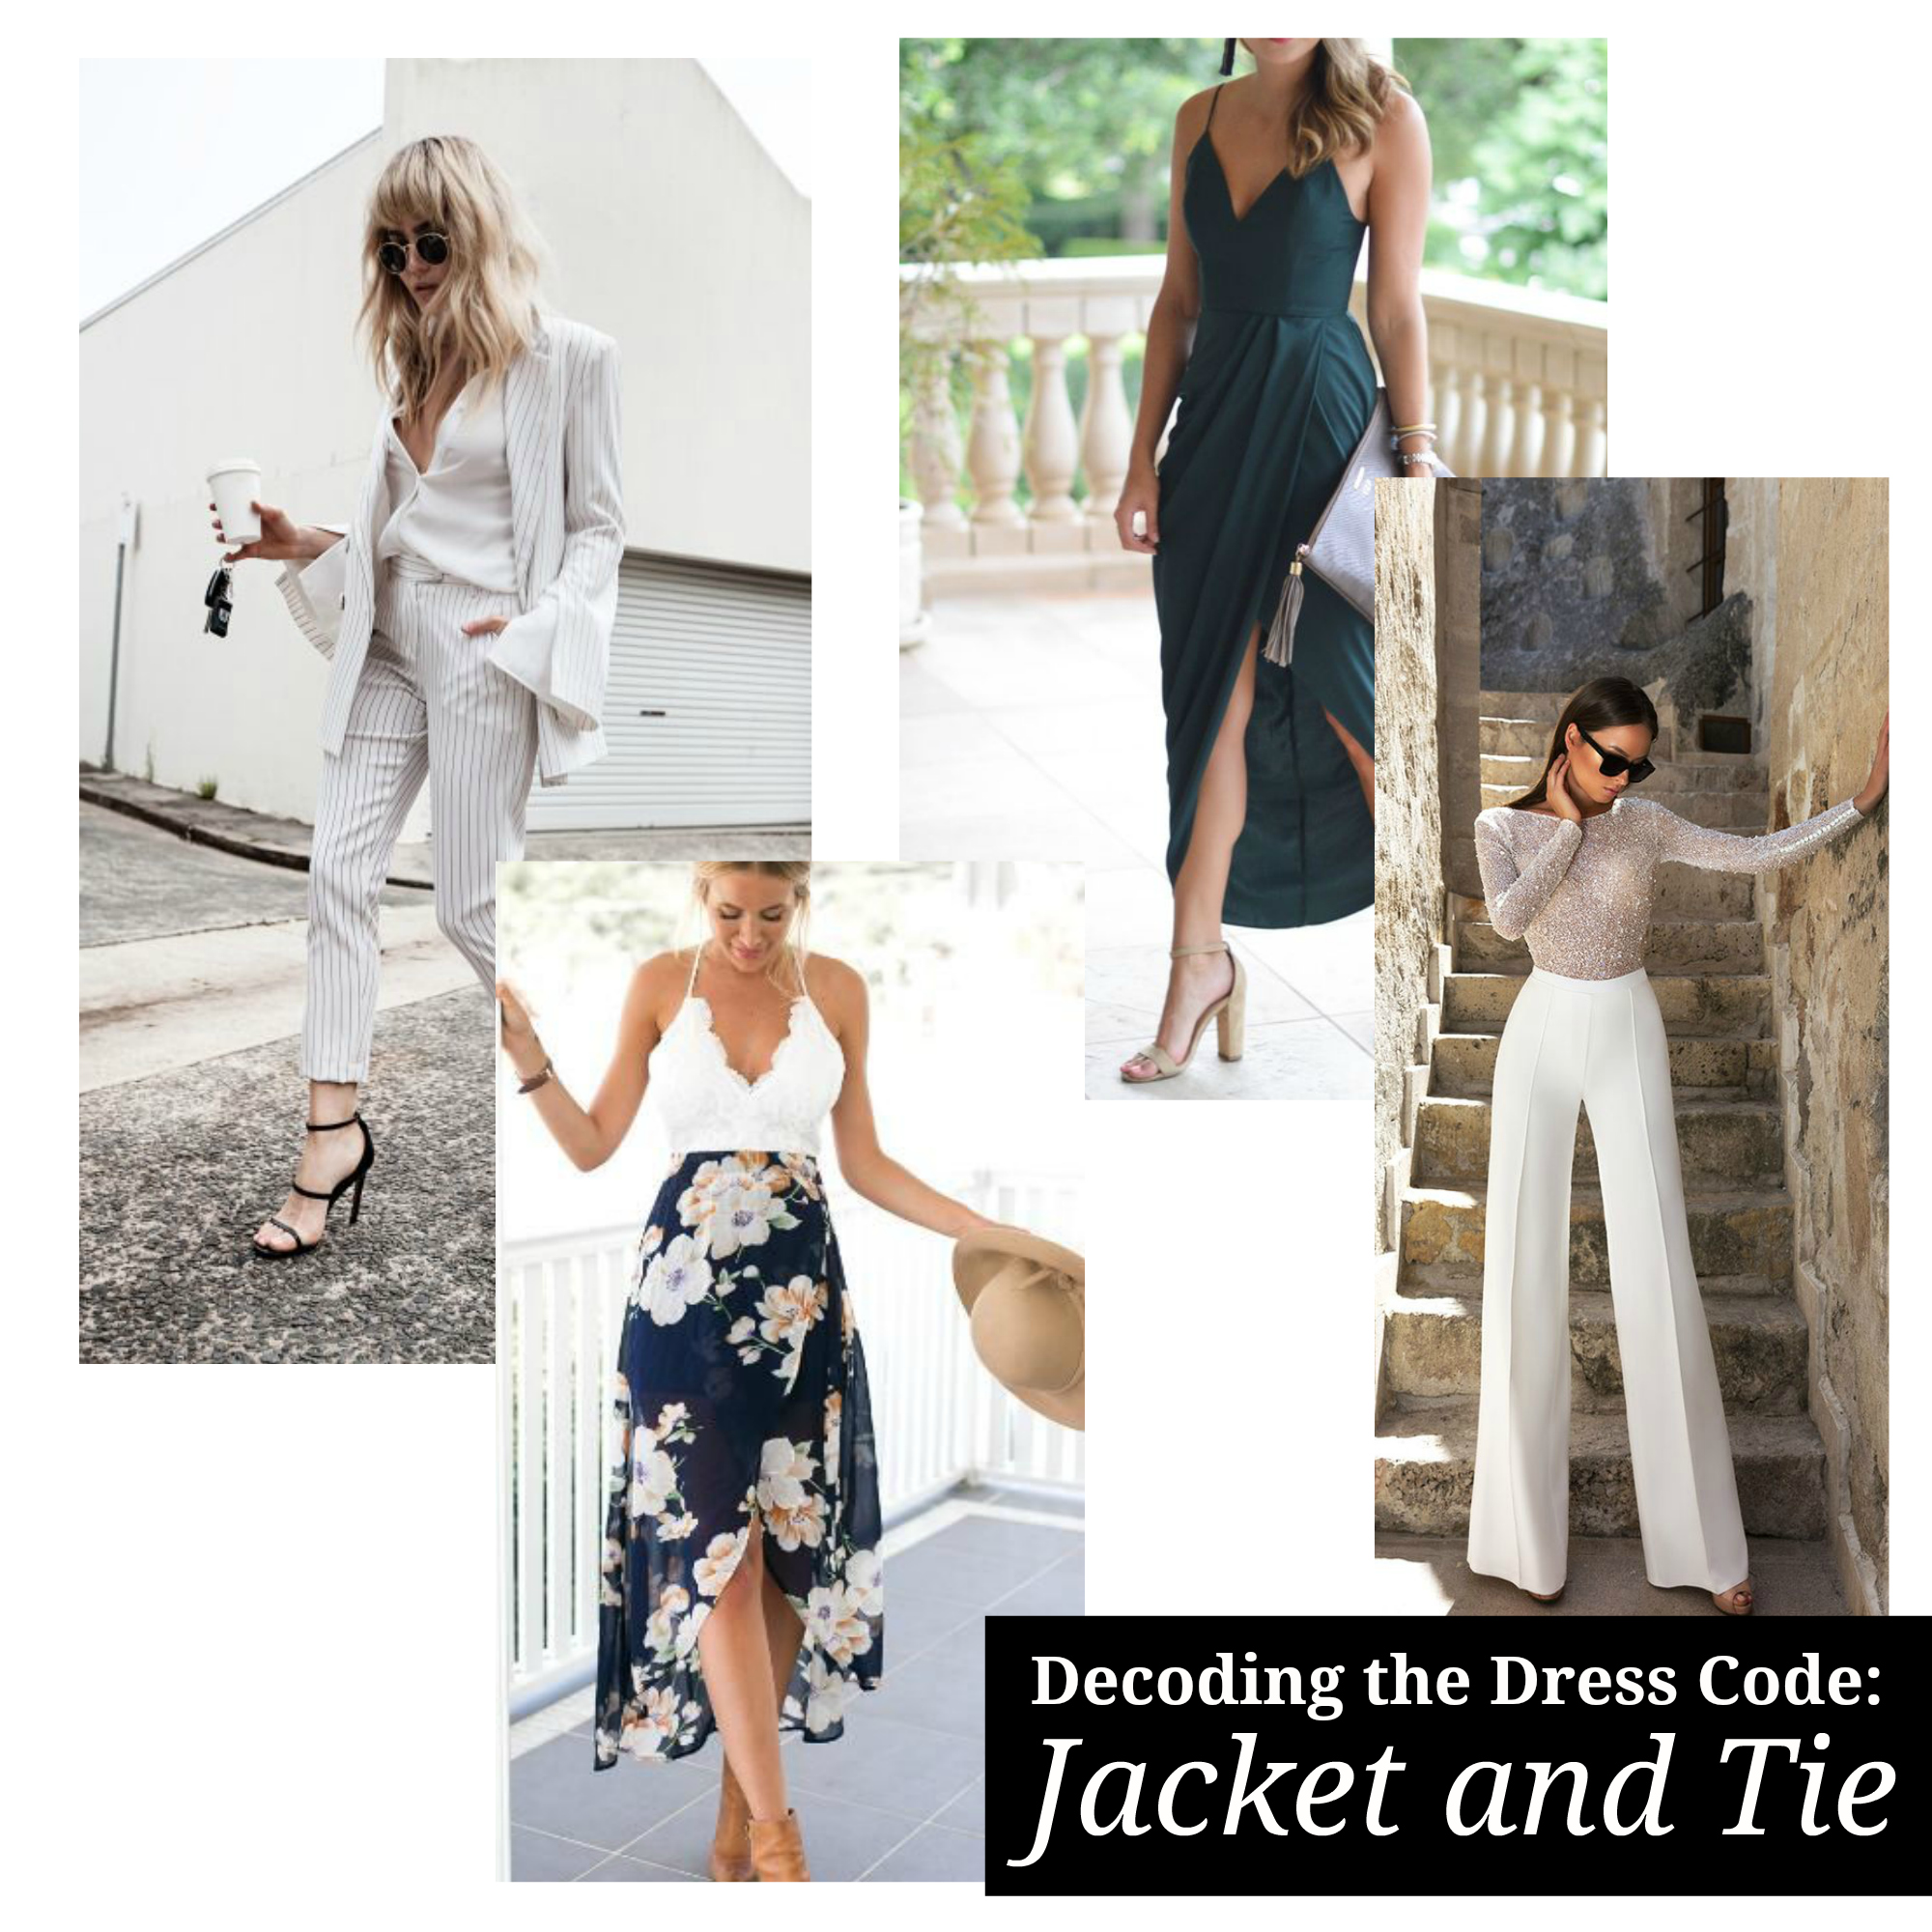 Decoding the Dress Code: What Should I Wear to a Jacket and Tie Wedding ...